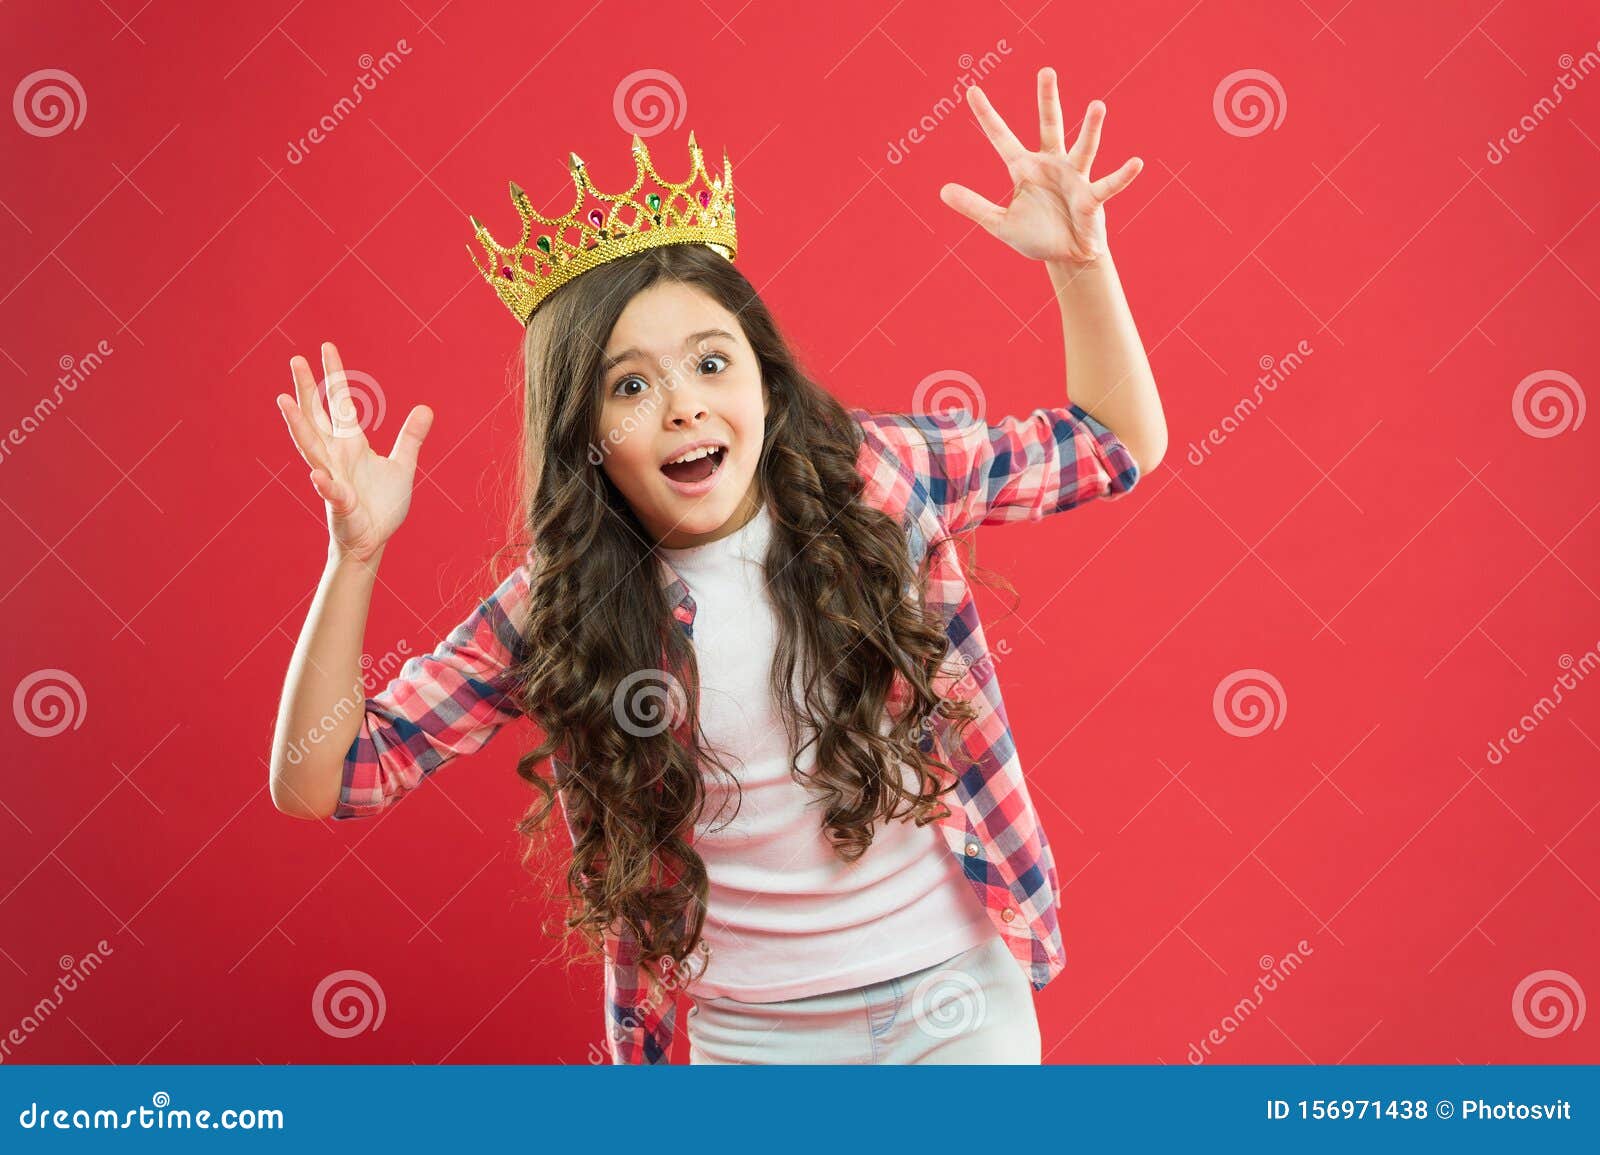 In Panic. Scared Champion. Crowned Champion with Crown on Red Background. Funky Small Child Got Champion Tittle Stock Photo - Image of happy, 156971438